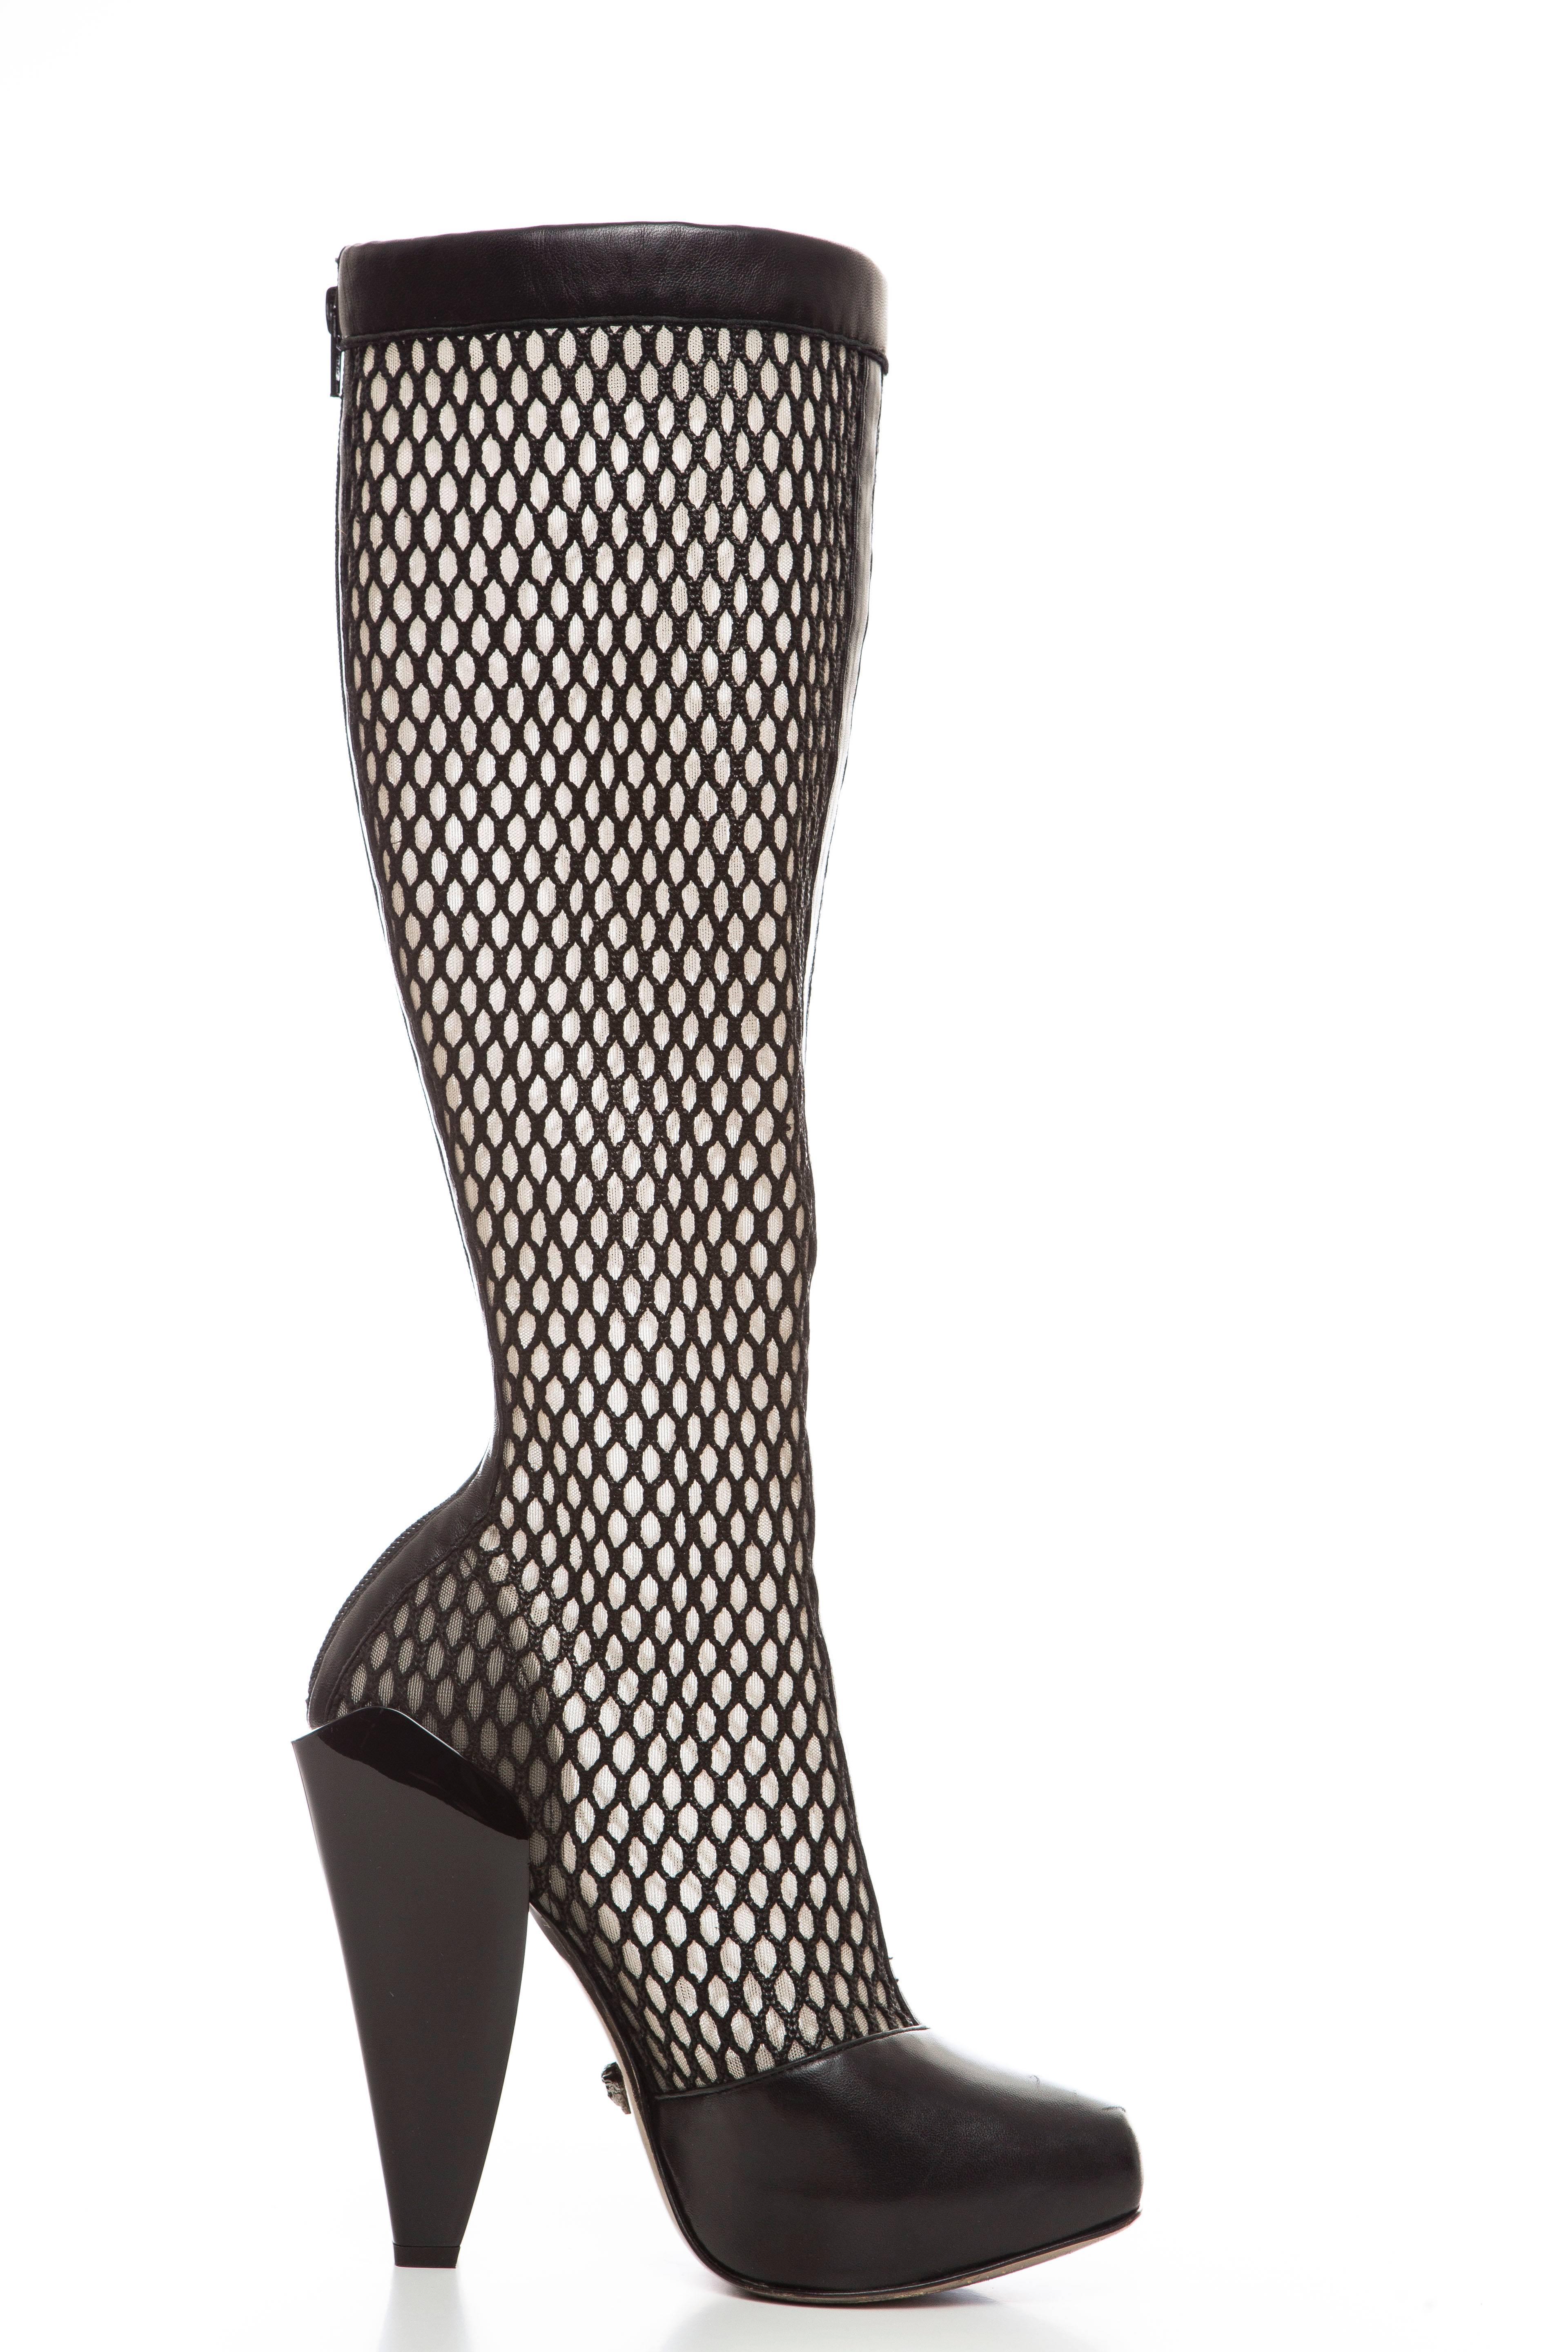 Versace, Autumn - Winter 2012 black woven mesh boots with black leather trim, leather paneling at toe-box, zip closure at counter and poured architectural heels.